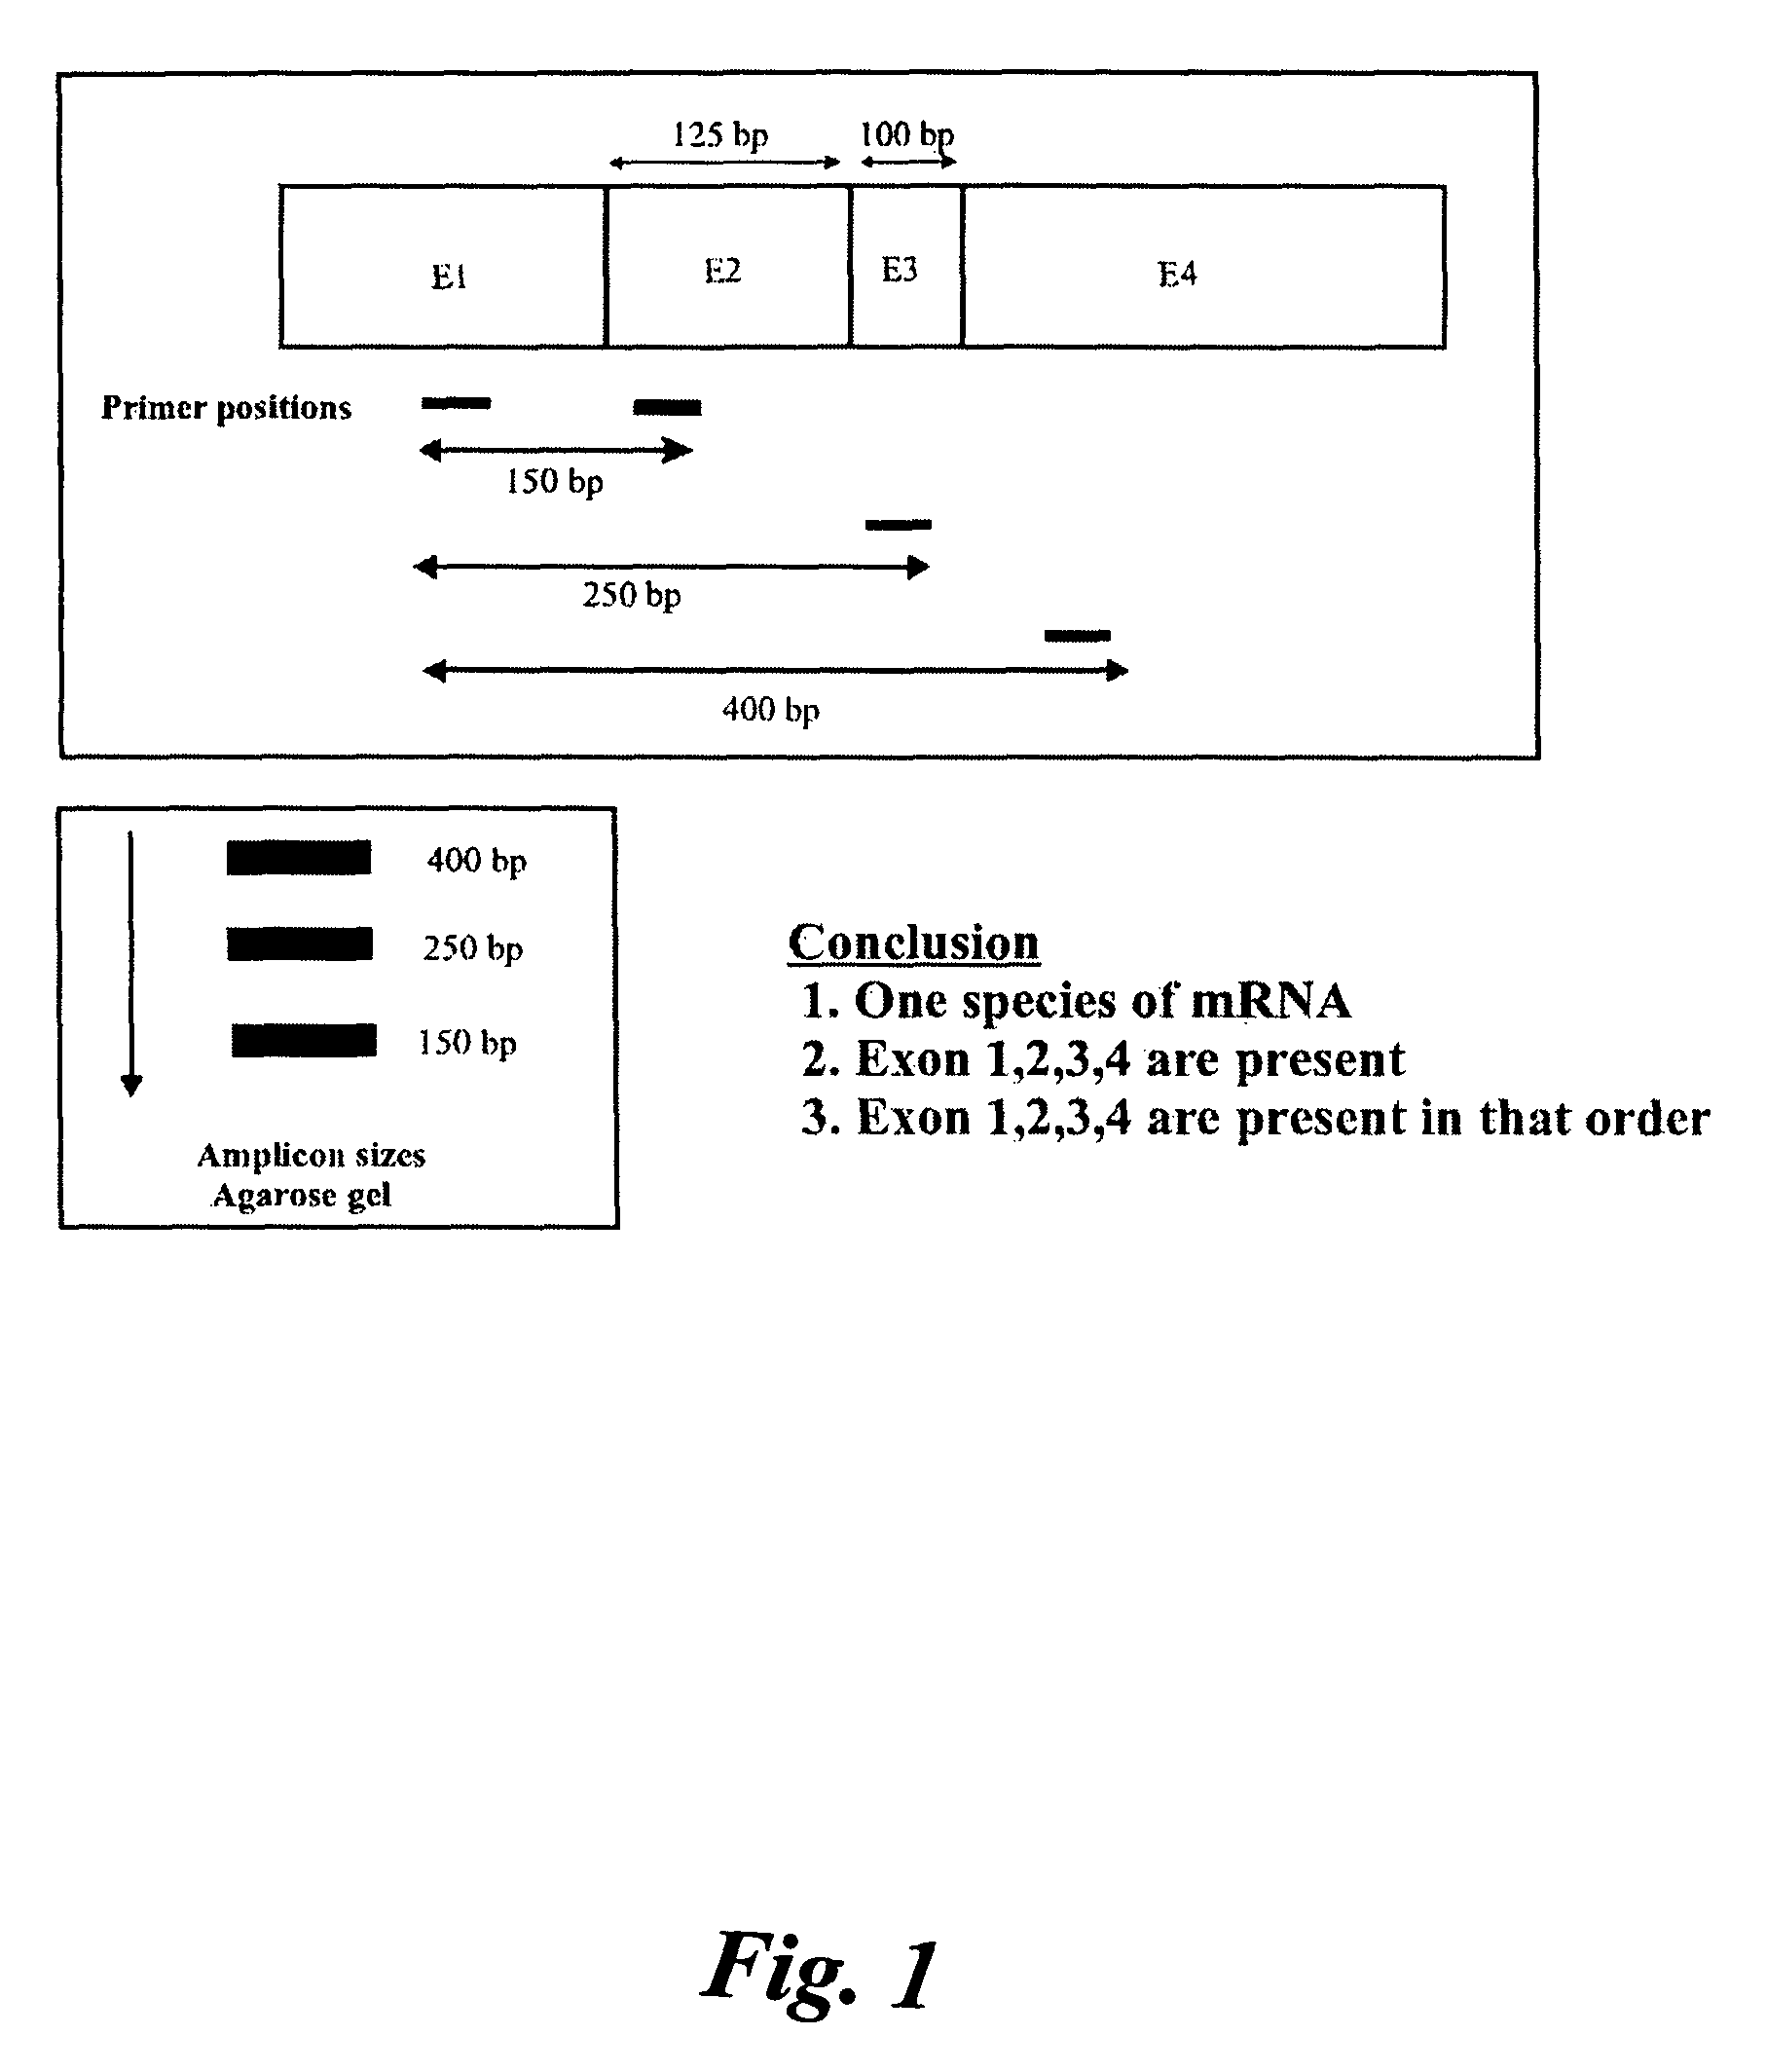 Determination of variants produced upon replication or transcription of nucleic acid sequences